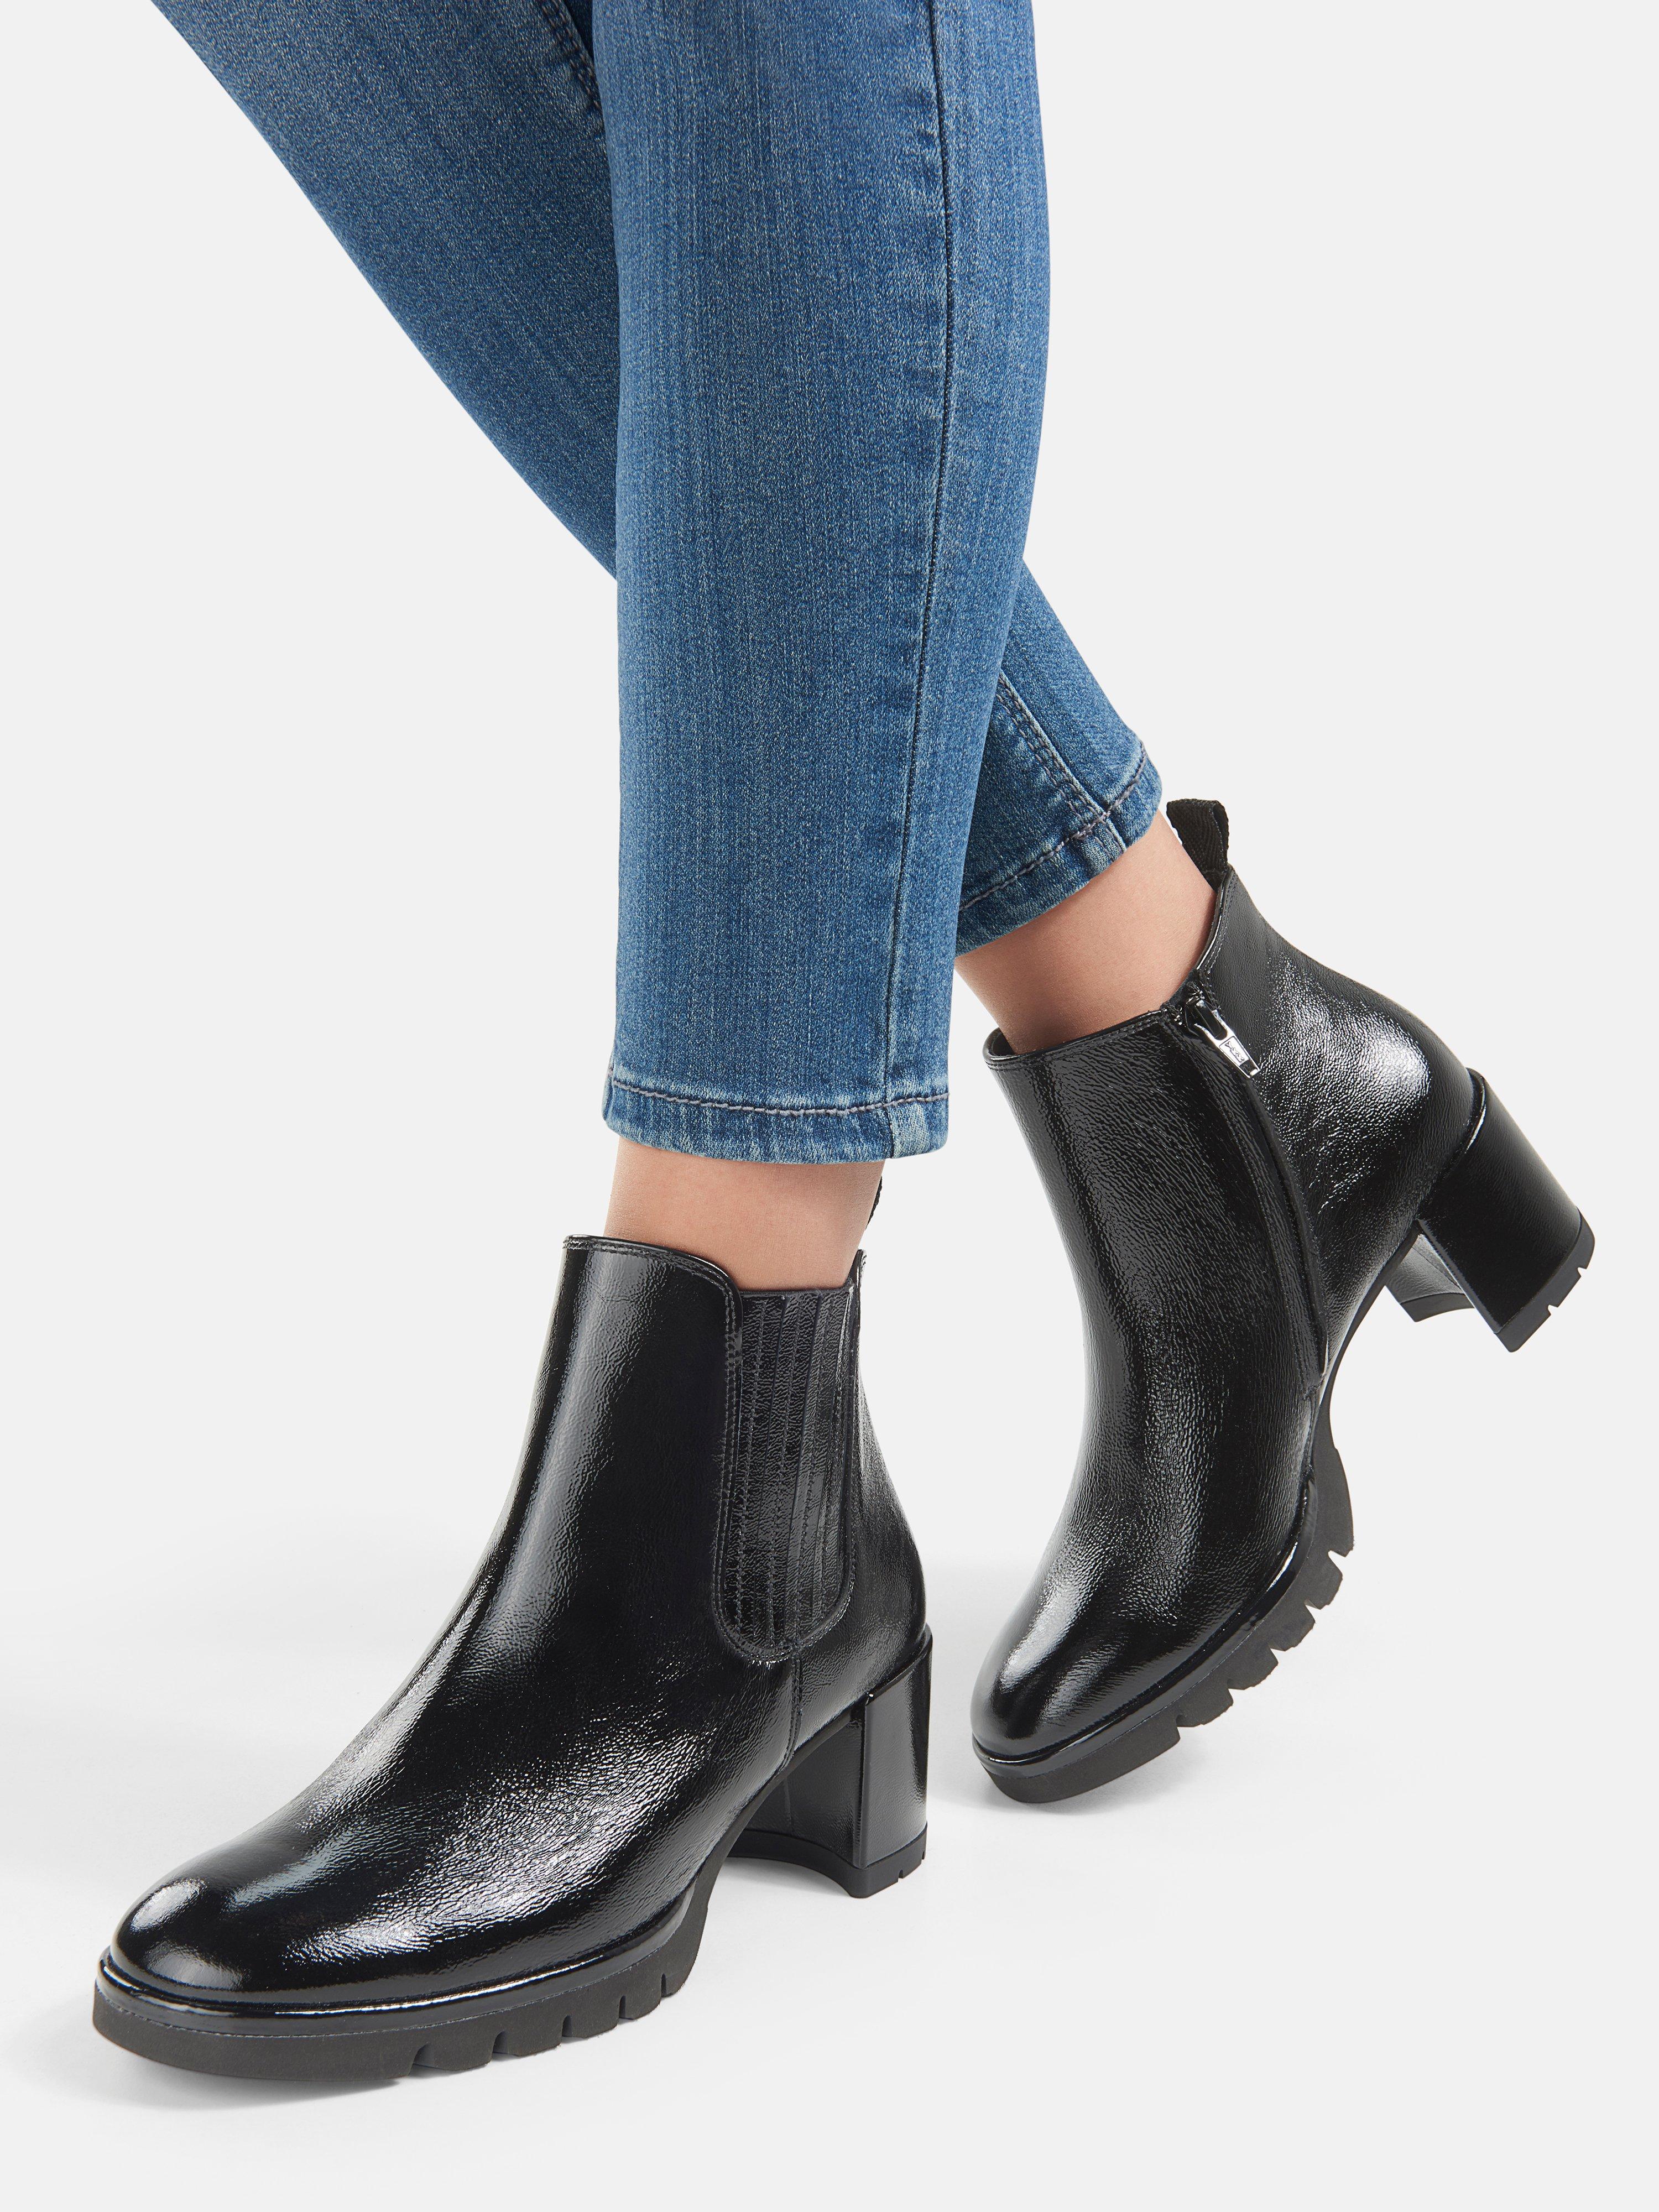 Paul Green Calfskin Patent Leather Platform Ankle Boots Black